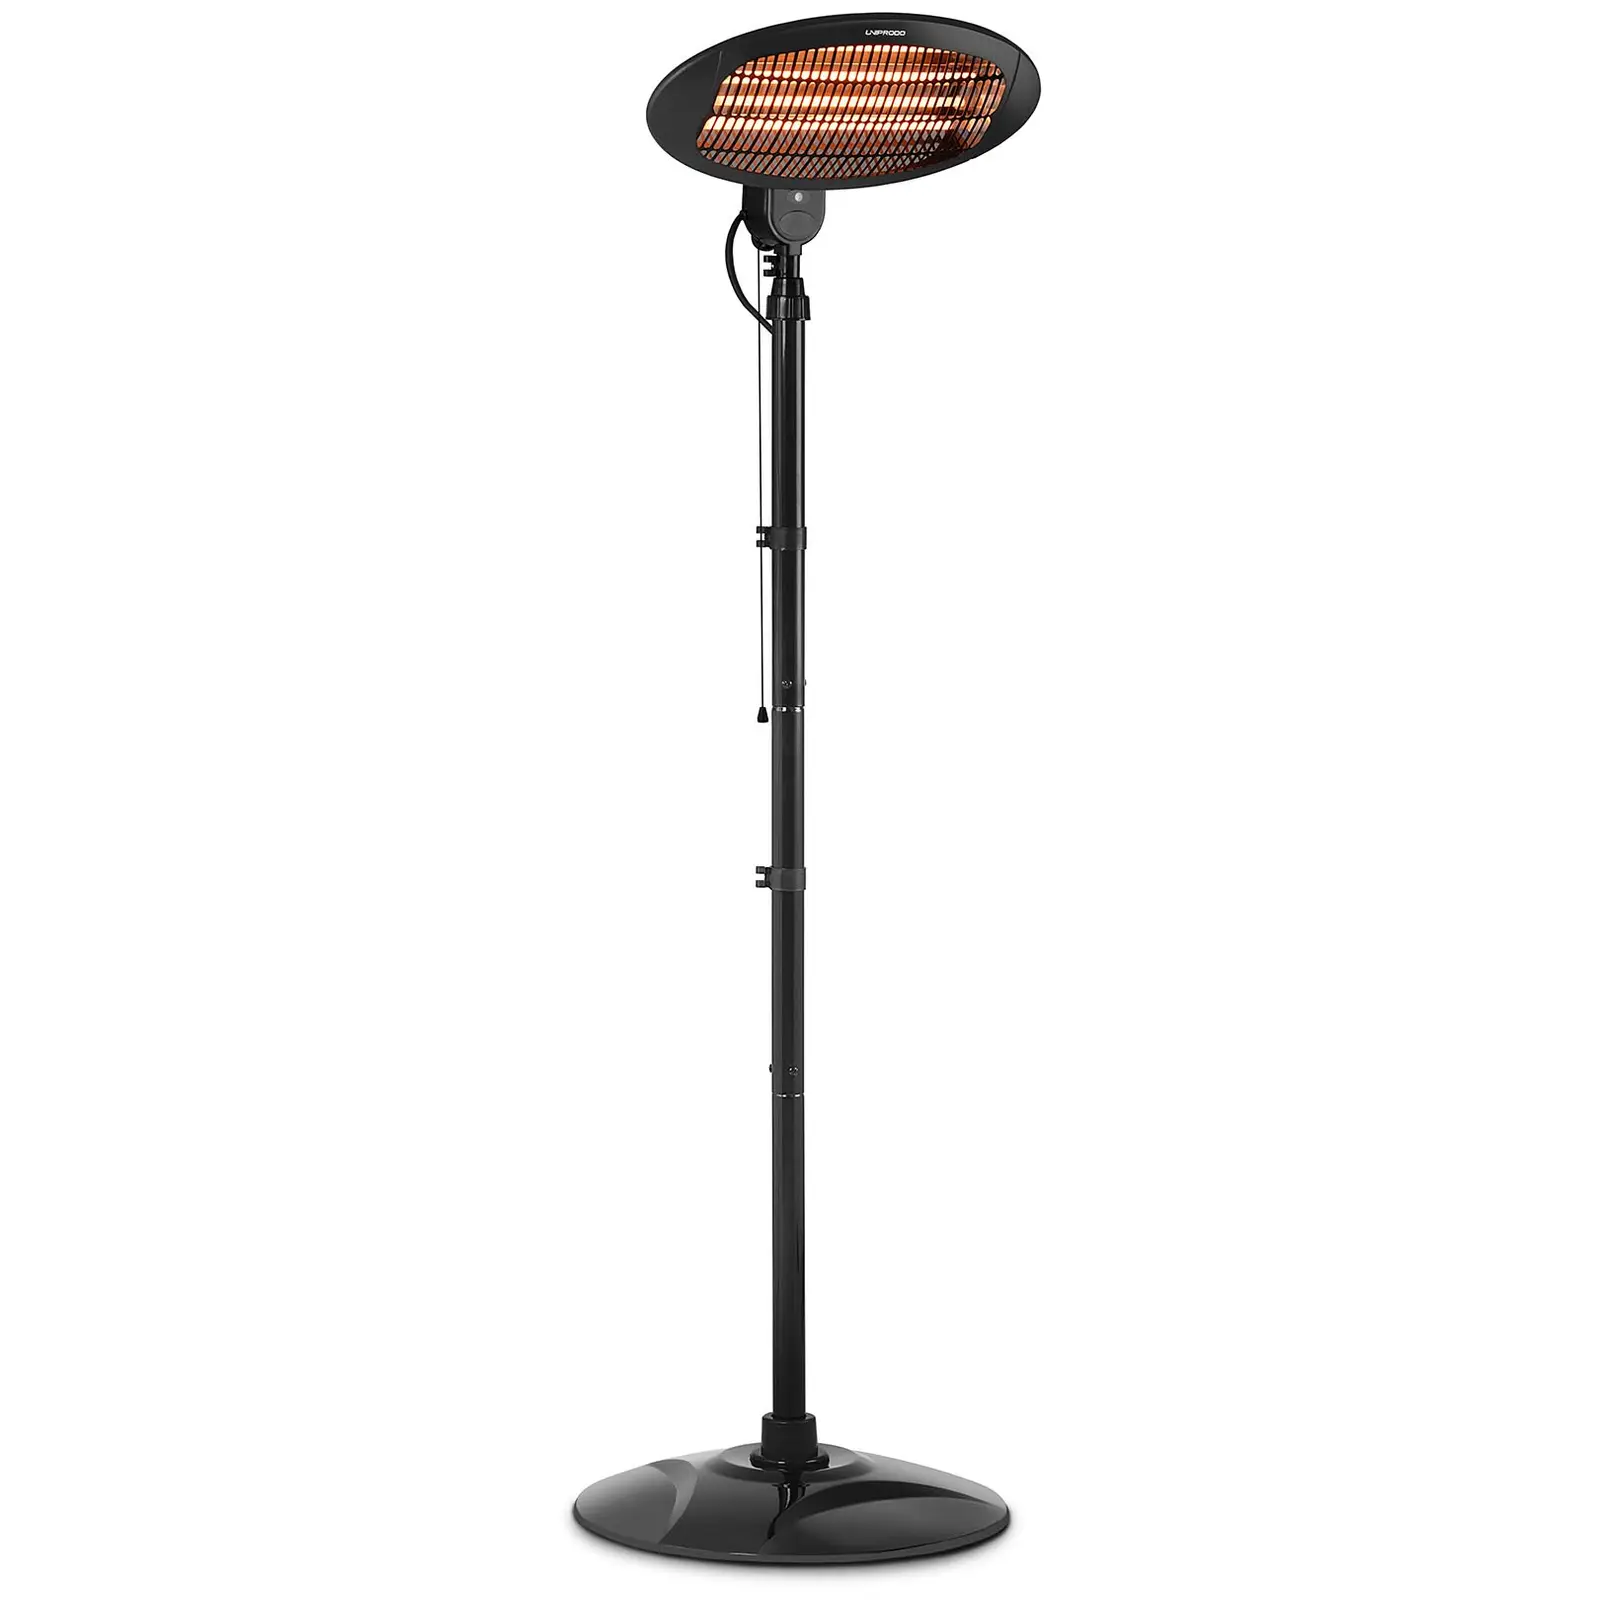 Patio infrared heater